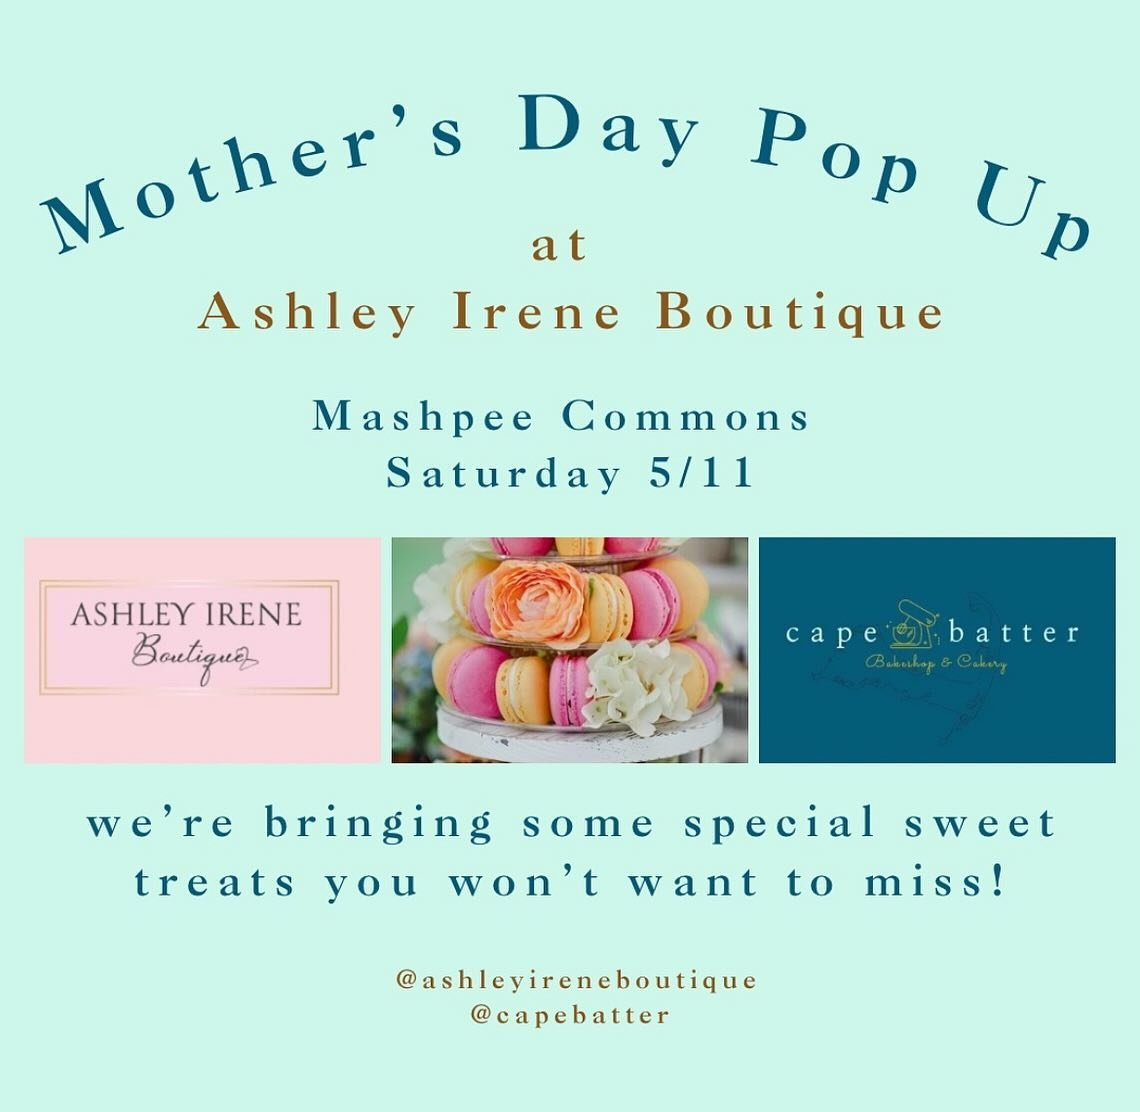 Come on down Saturday to @ashleyireneboutique at the Mashpee Commons for some Mother&rsquo;s Day shopping, unique finds and sweet treats 🫶🛍️

We&rsquo;re bringing super cute Mother&rsquo;s Day Macaron Packs, Mini Lambeth (vintage) cakes and a coupl